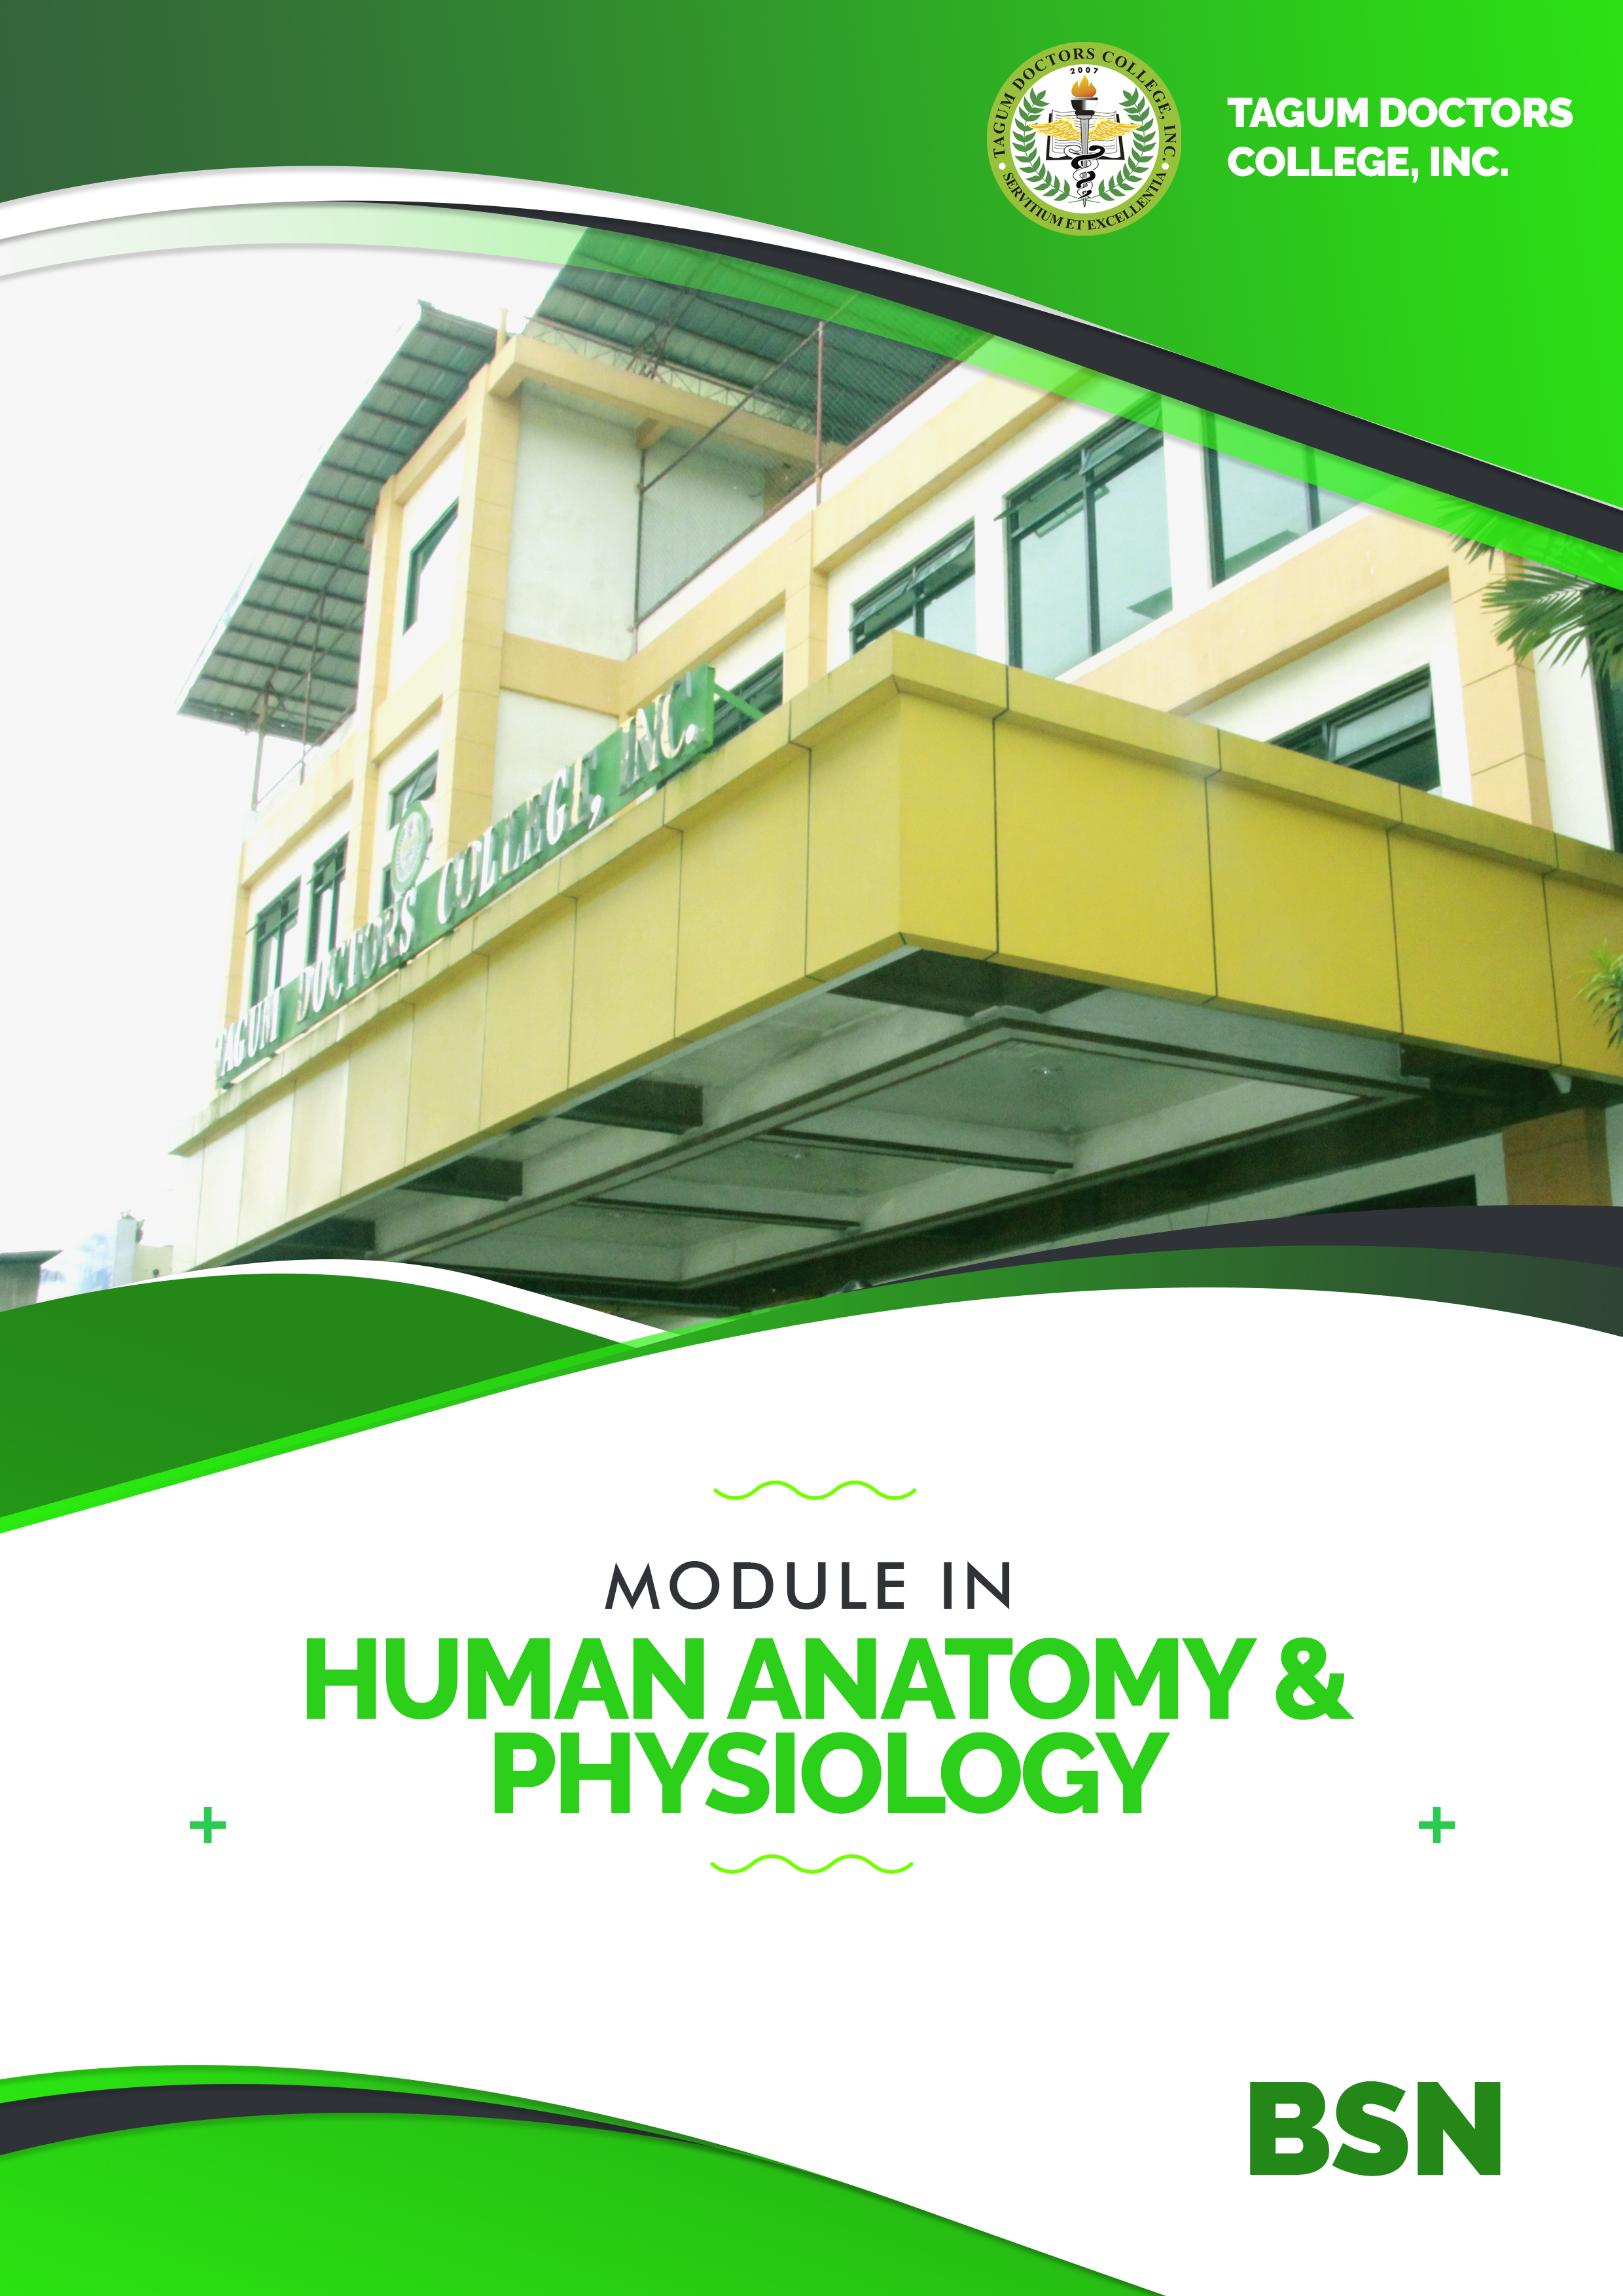 Human Anatomy and Physiology Lec - BSN 1-C